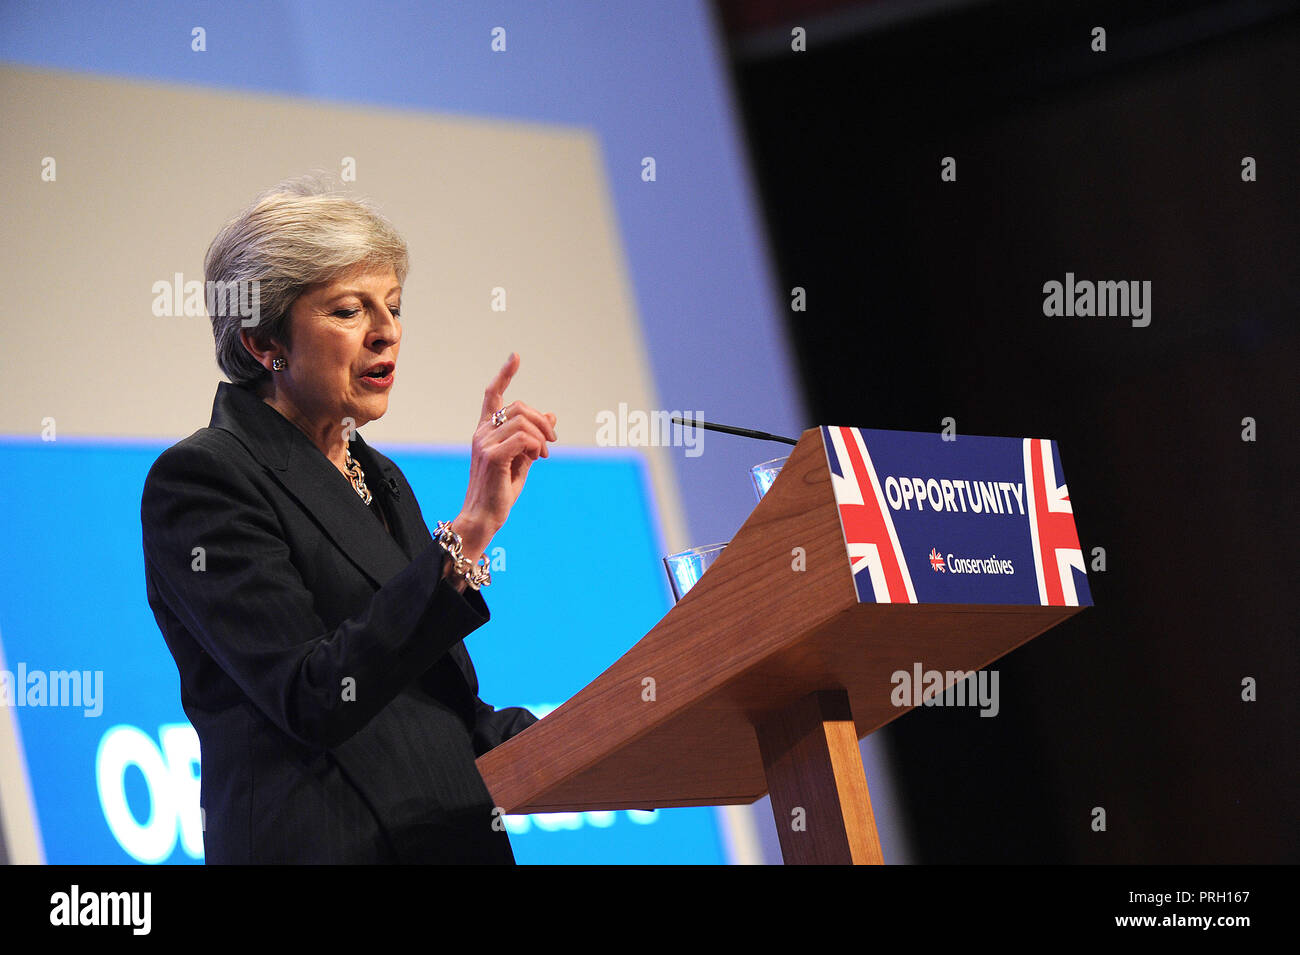 Birmingham, England. 3rd October, 2018.  Theresa May MP, Prime Minister and Leader of the Conservative Party, delivers her keynote speech to conference on the closing session of the fourth day of the Conservative Party annual conference at the ICC.  Kevin Hayes/Alamy Live News Credit: Kevin Hayes/Alamy Live News Stock Photo